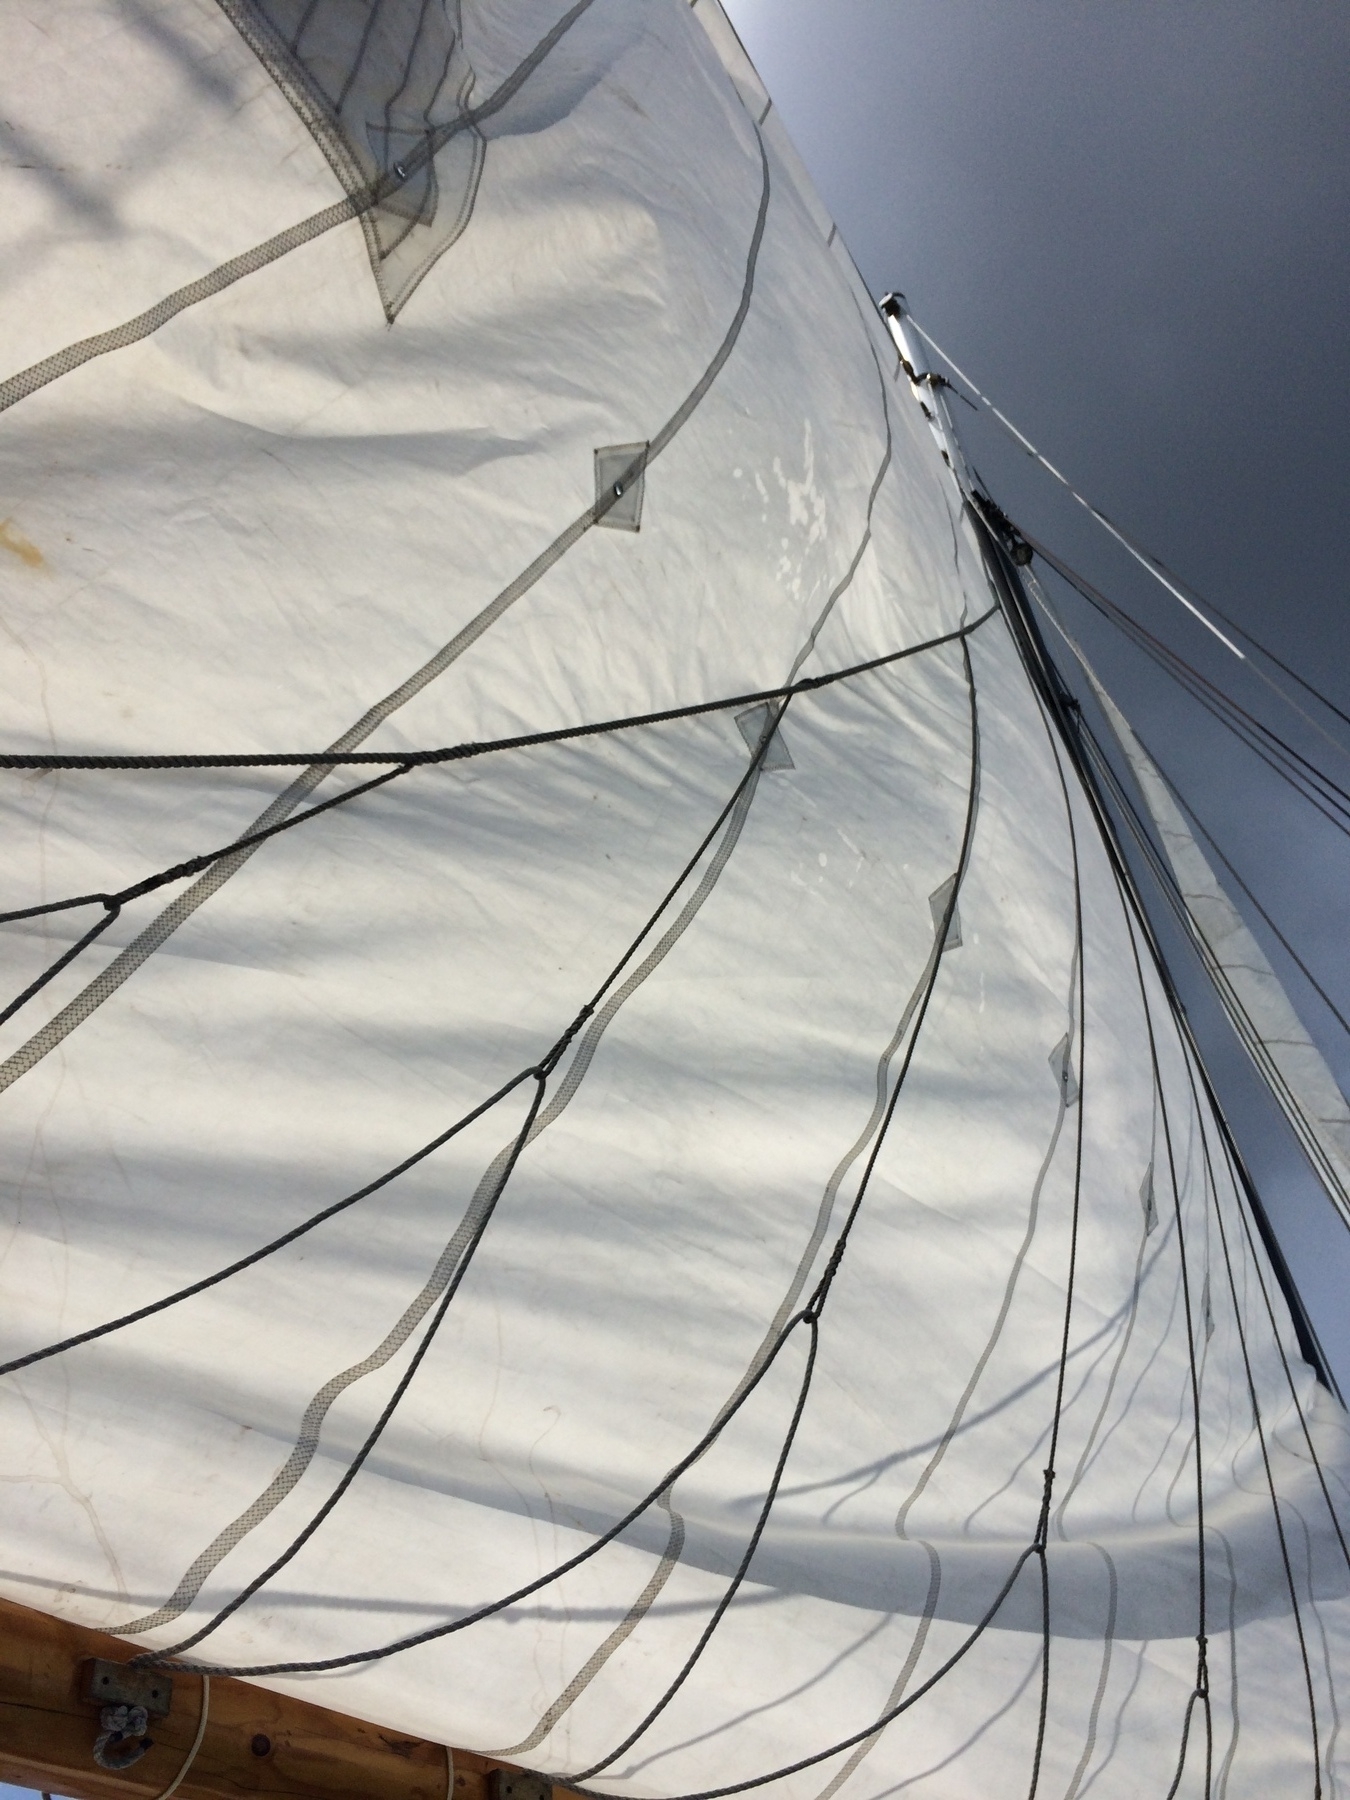 A sail on a sailboat filling the frame with ropes spread across the sail. 